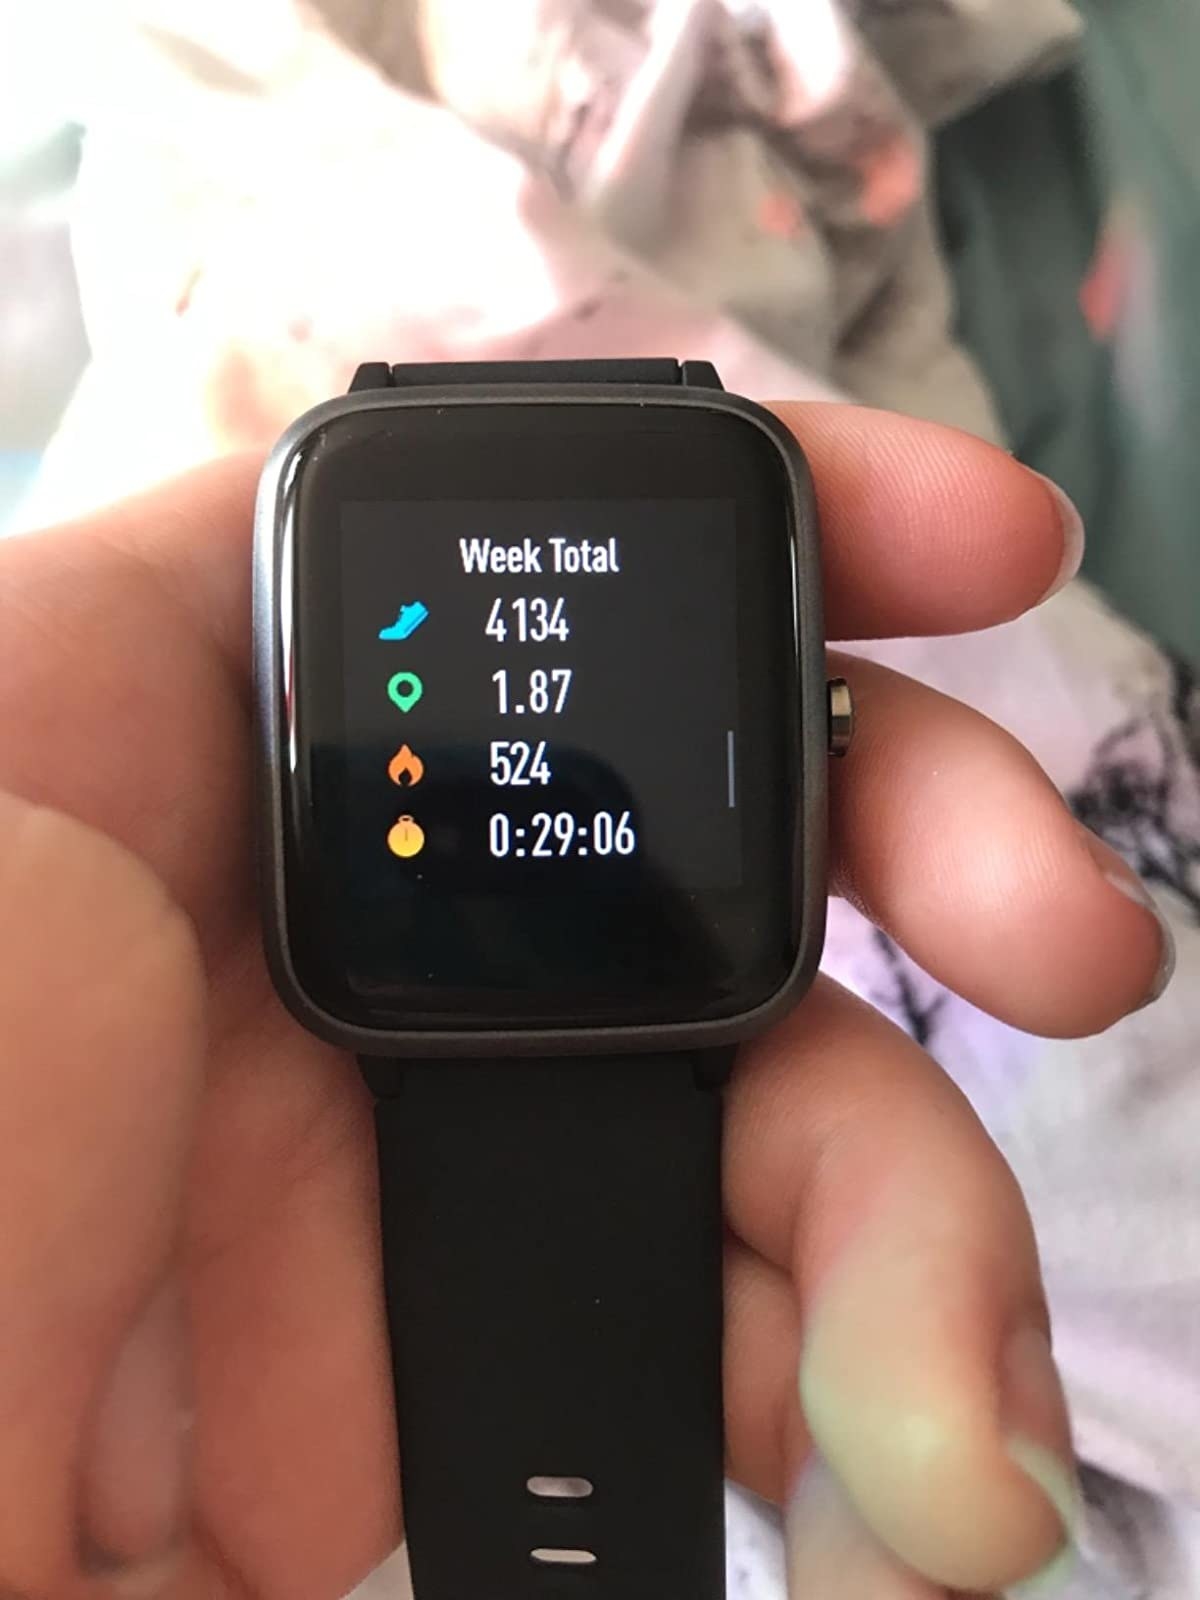 Reviewer holds black fitness tracker that shows steps walked, miles walked, calories burned, and time of workout on a watch-like screen